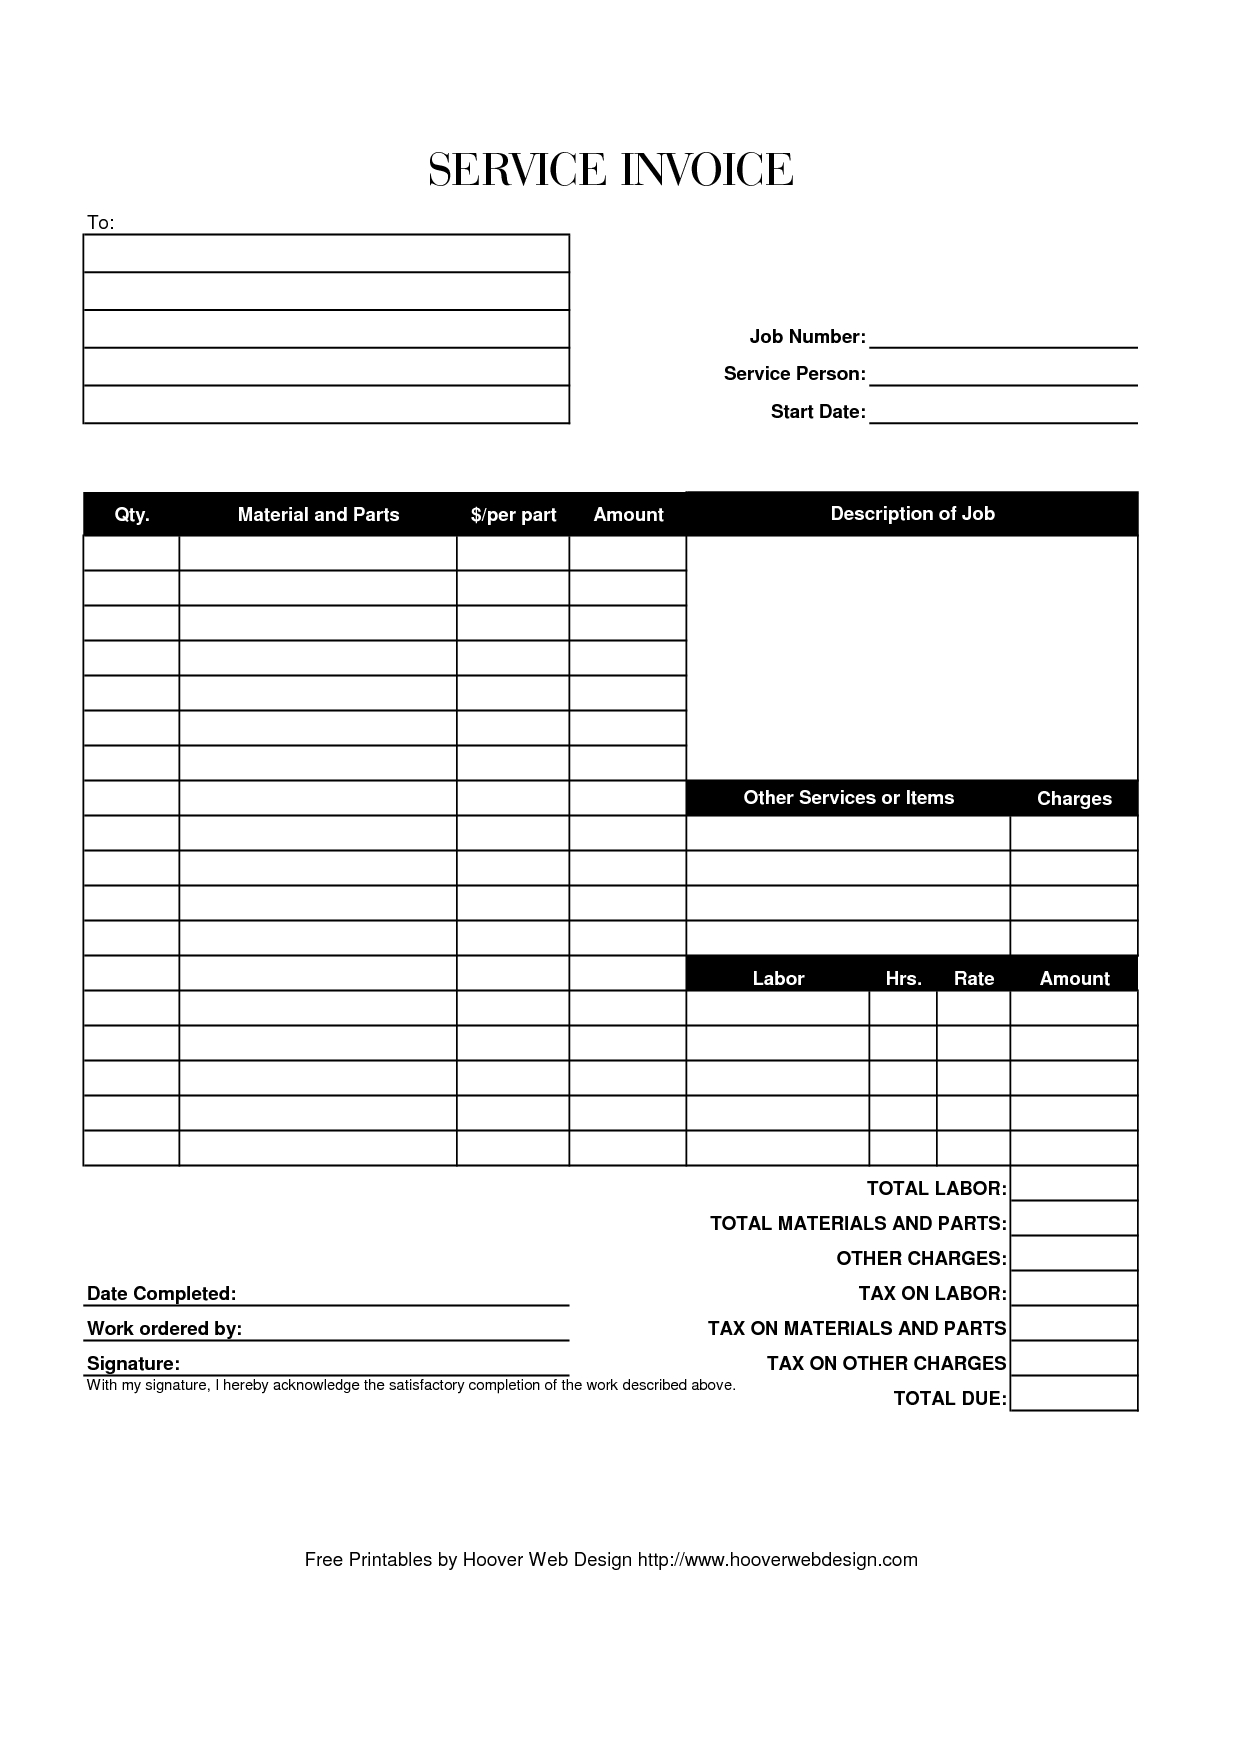 Hoover Receipts | Free Printable Service Invoice Template - Pdf - Free Printable Sales Receipts Online